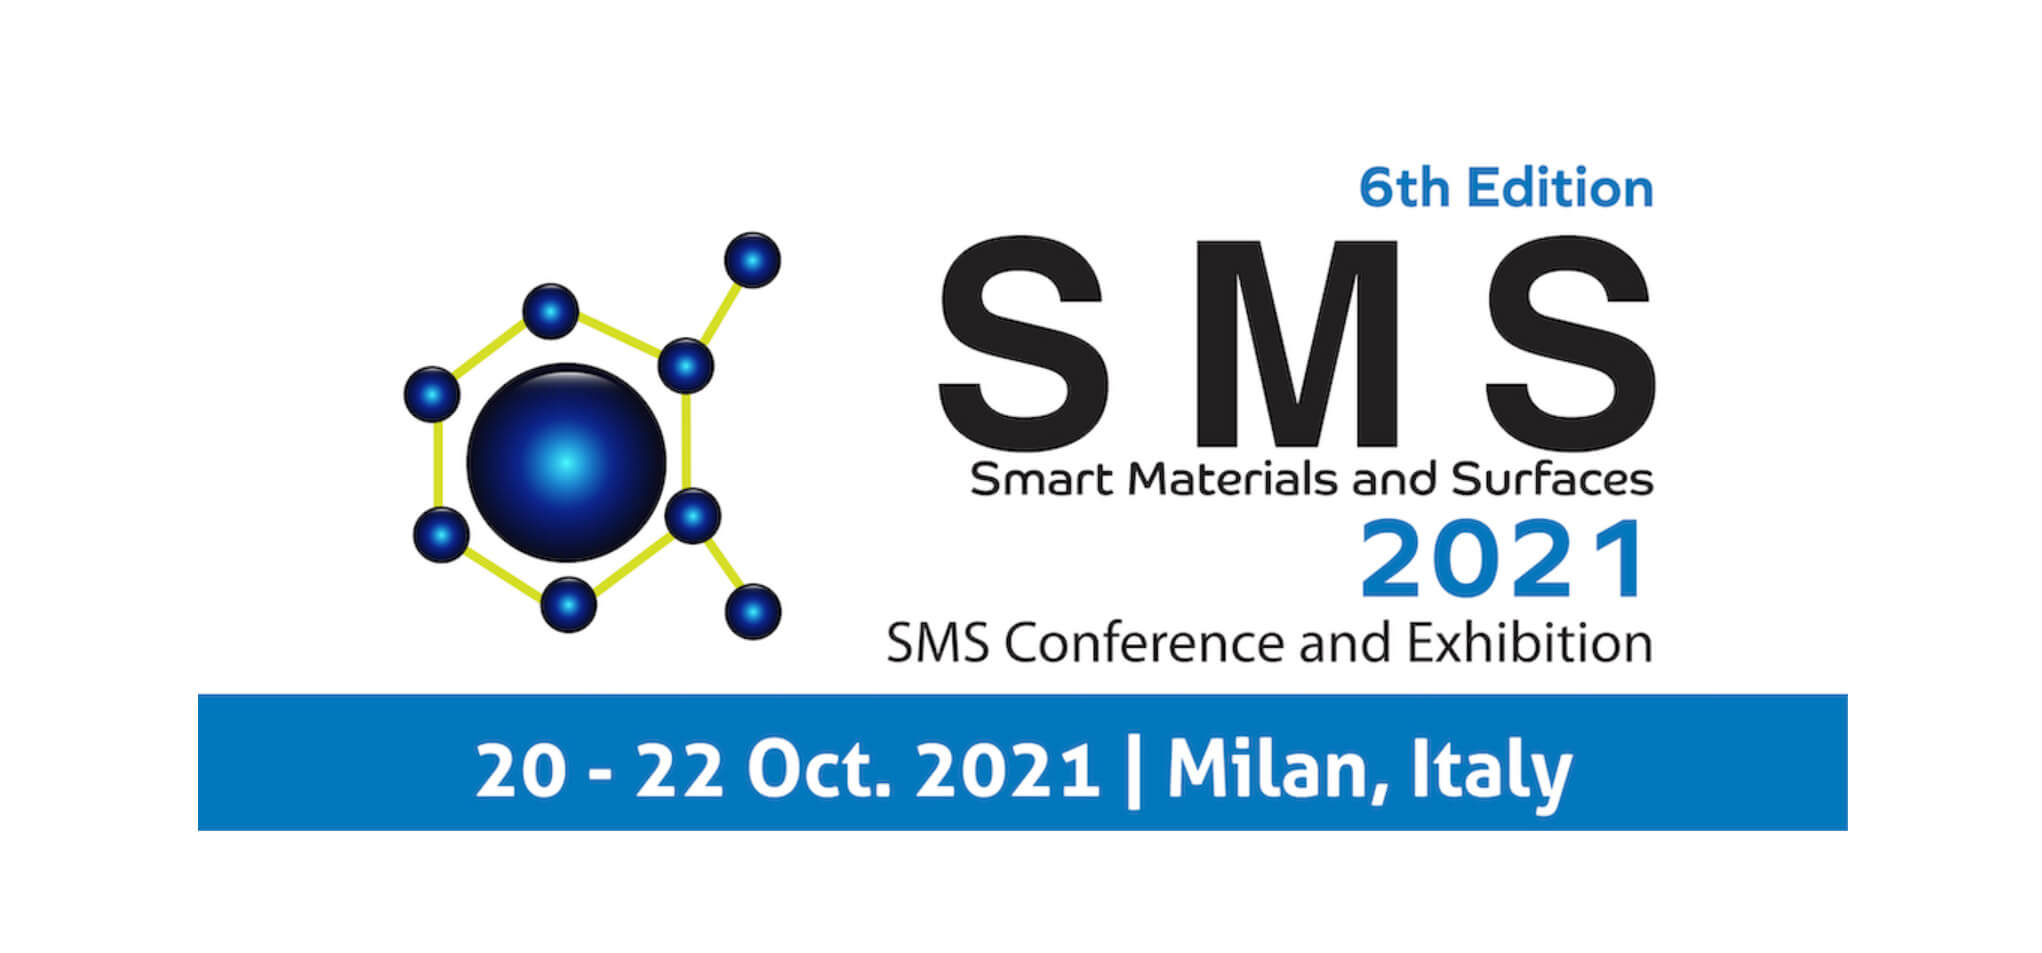 6th Edition Smart Materials & Surfaces conference